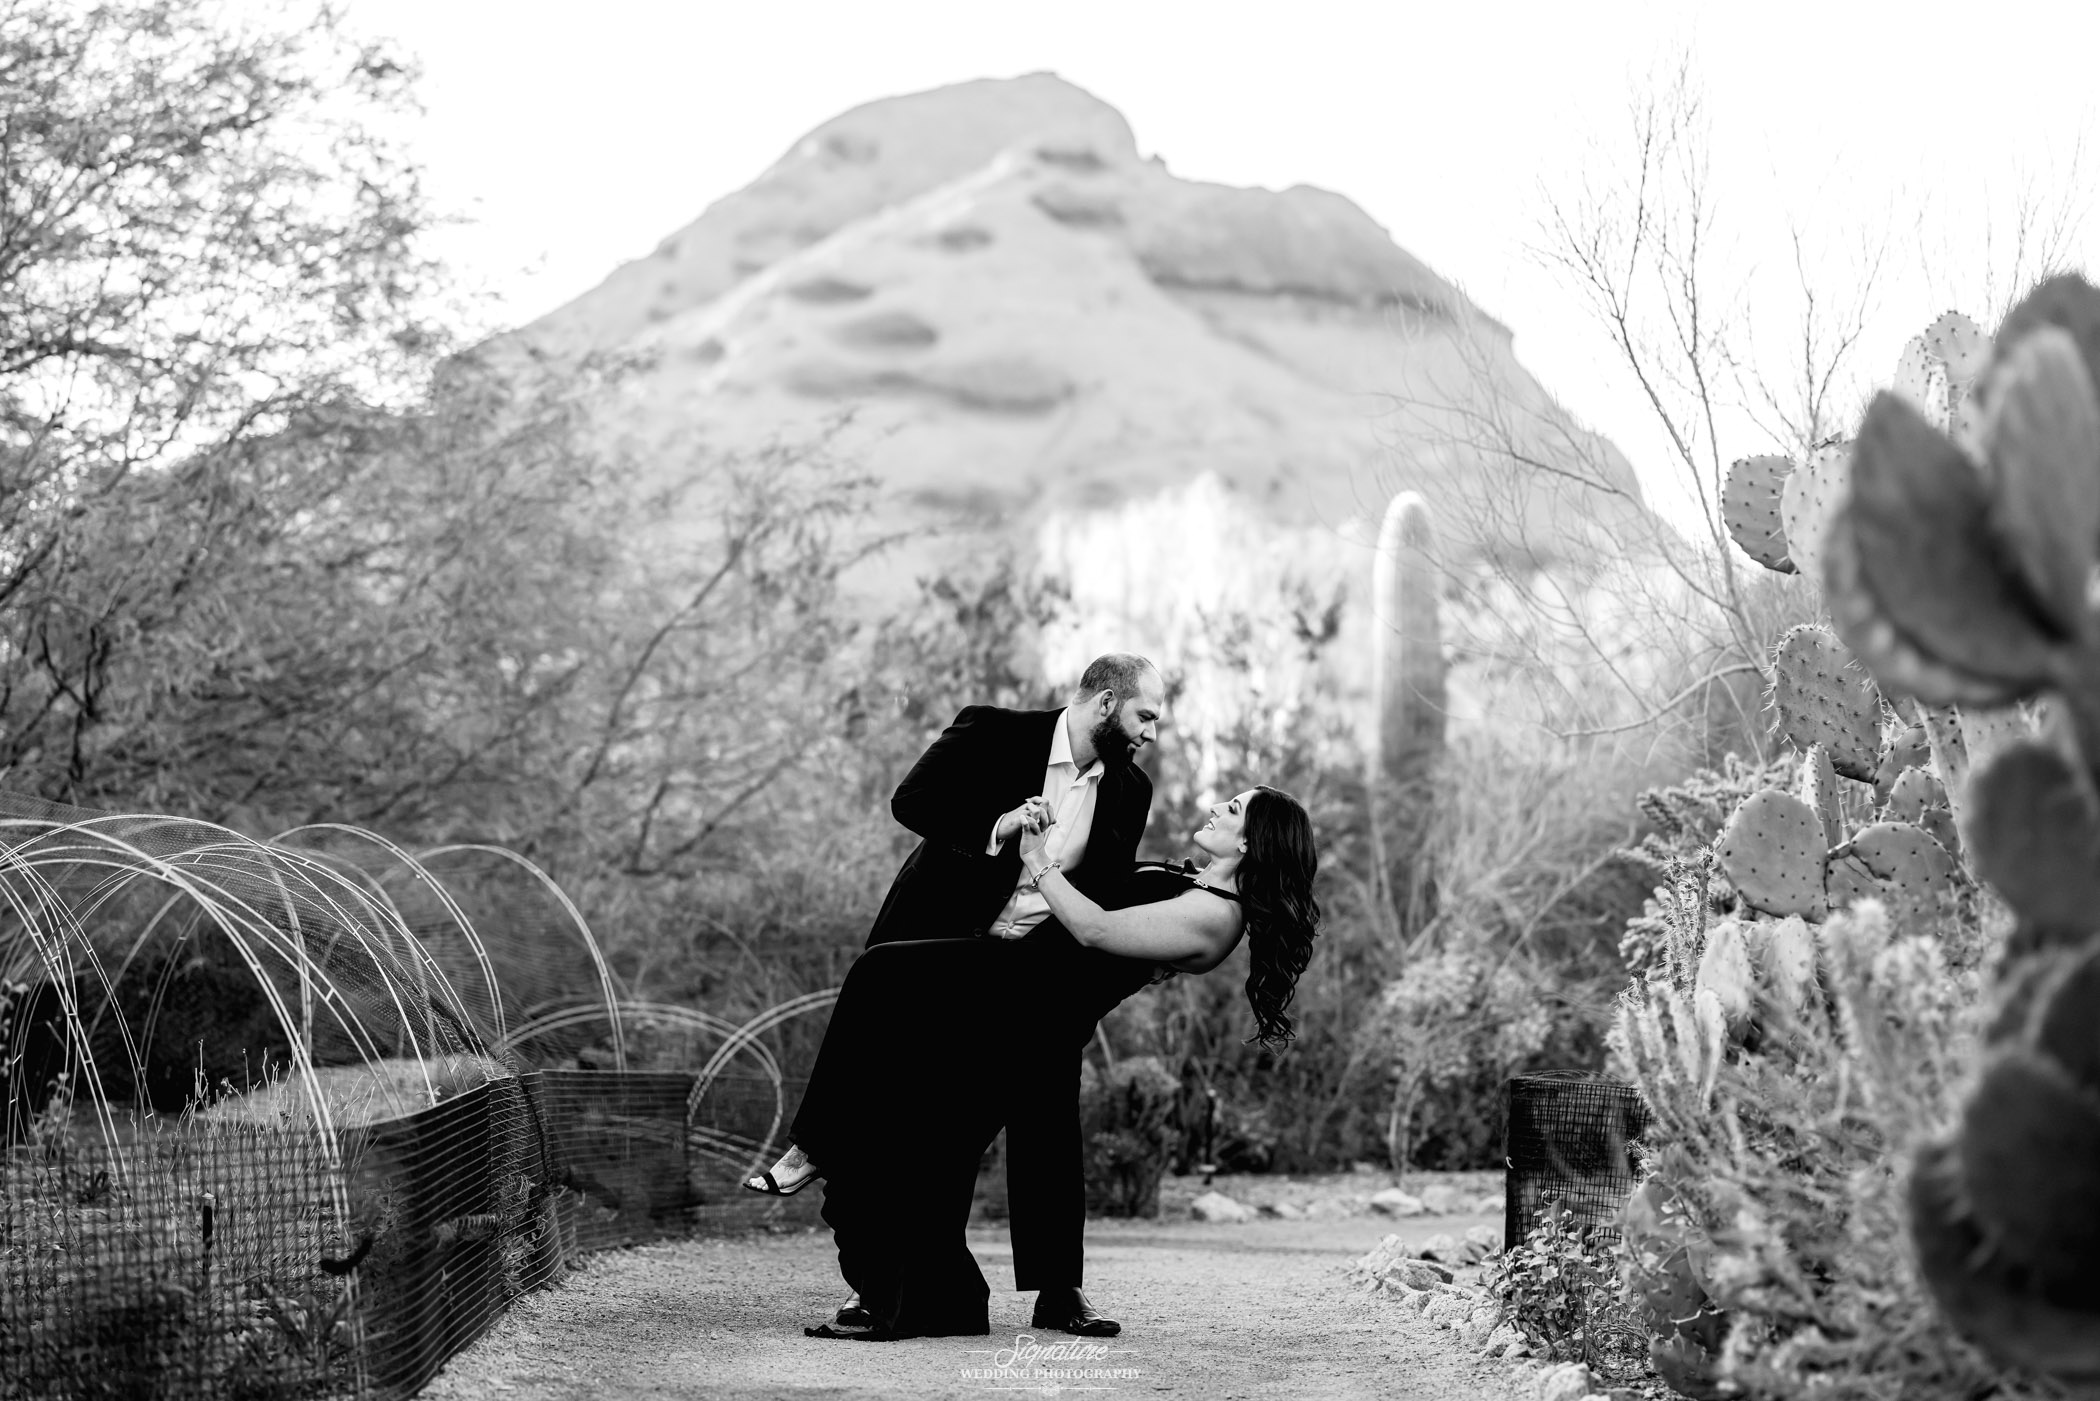 Man dipping woman in desert black and white